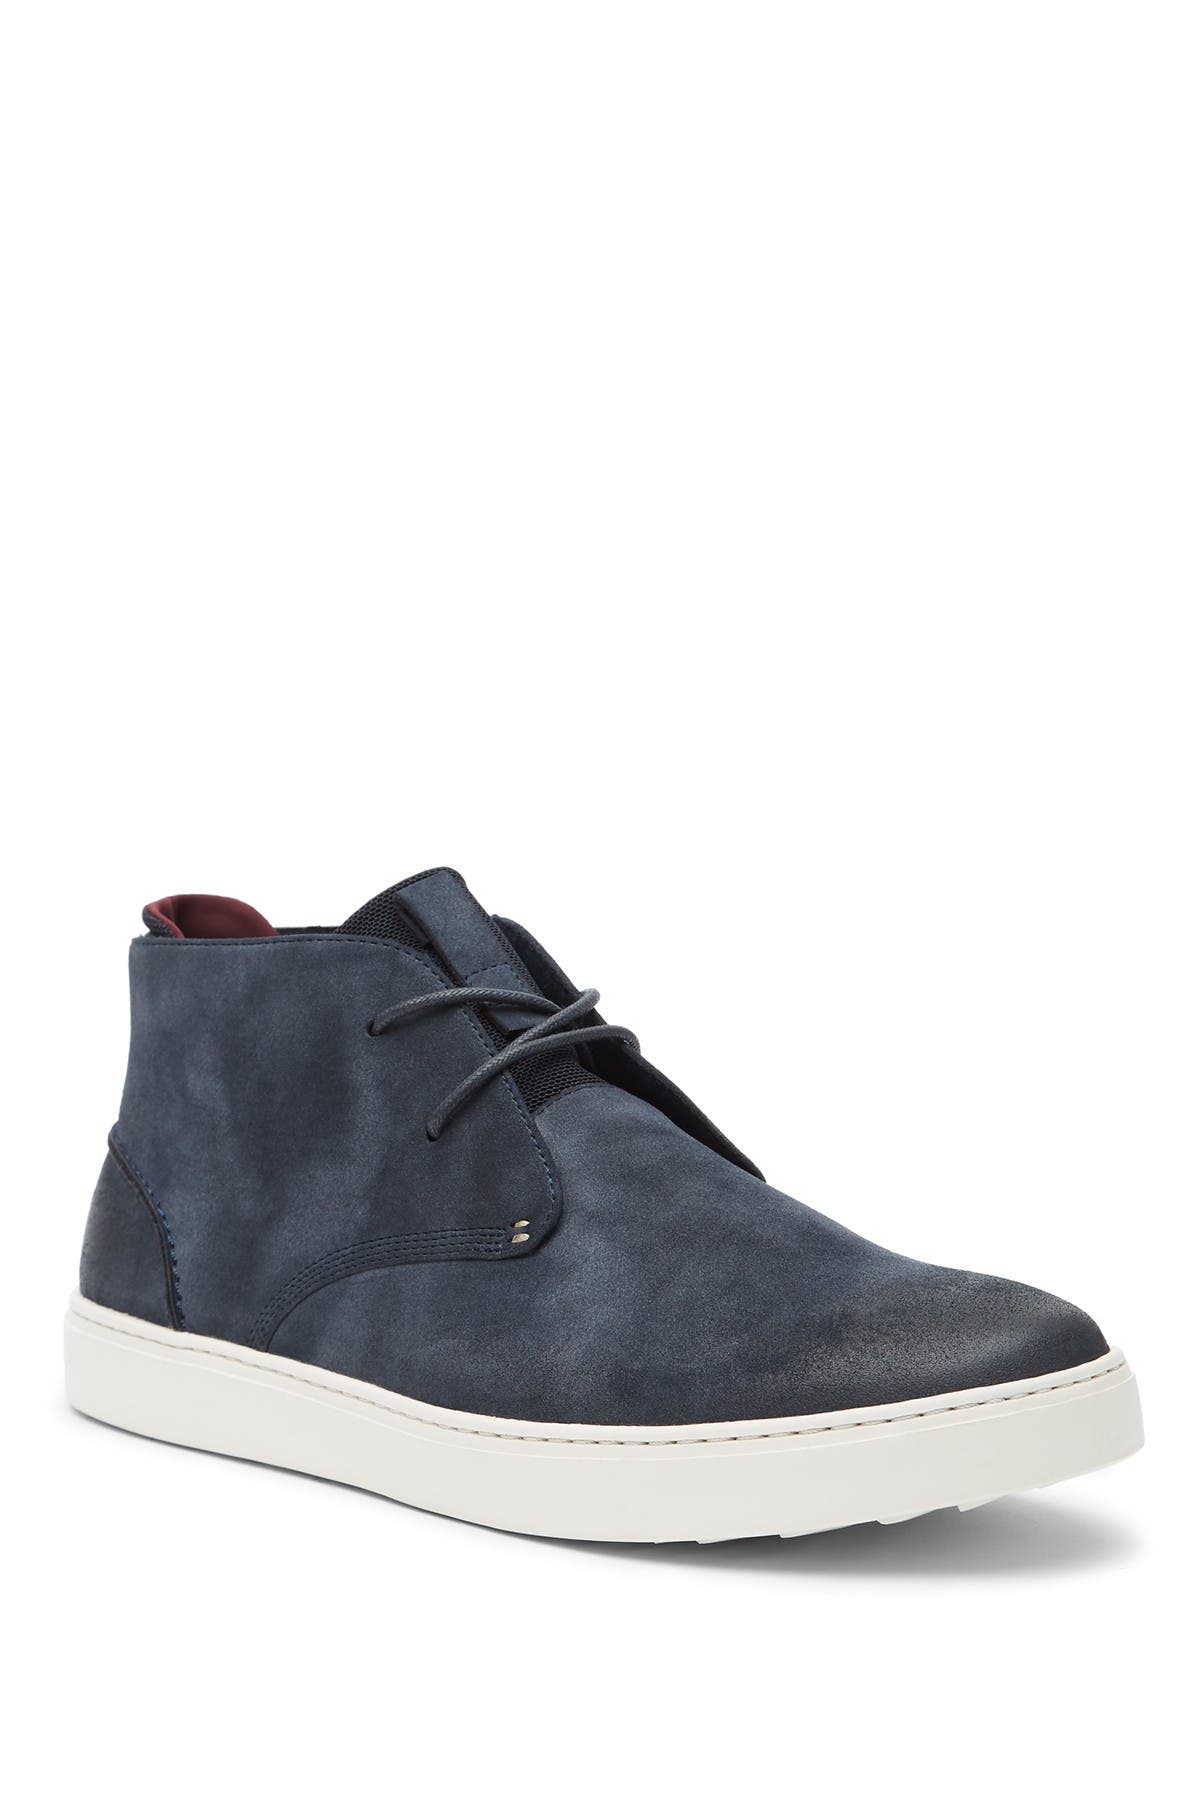 kenneth cole reaction indy sneaker